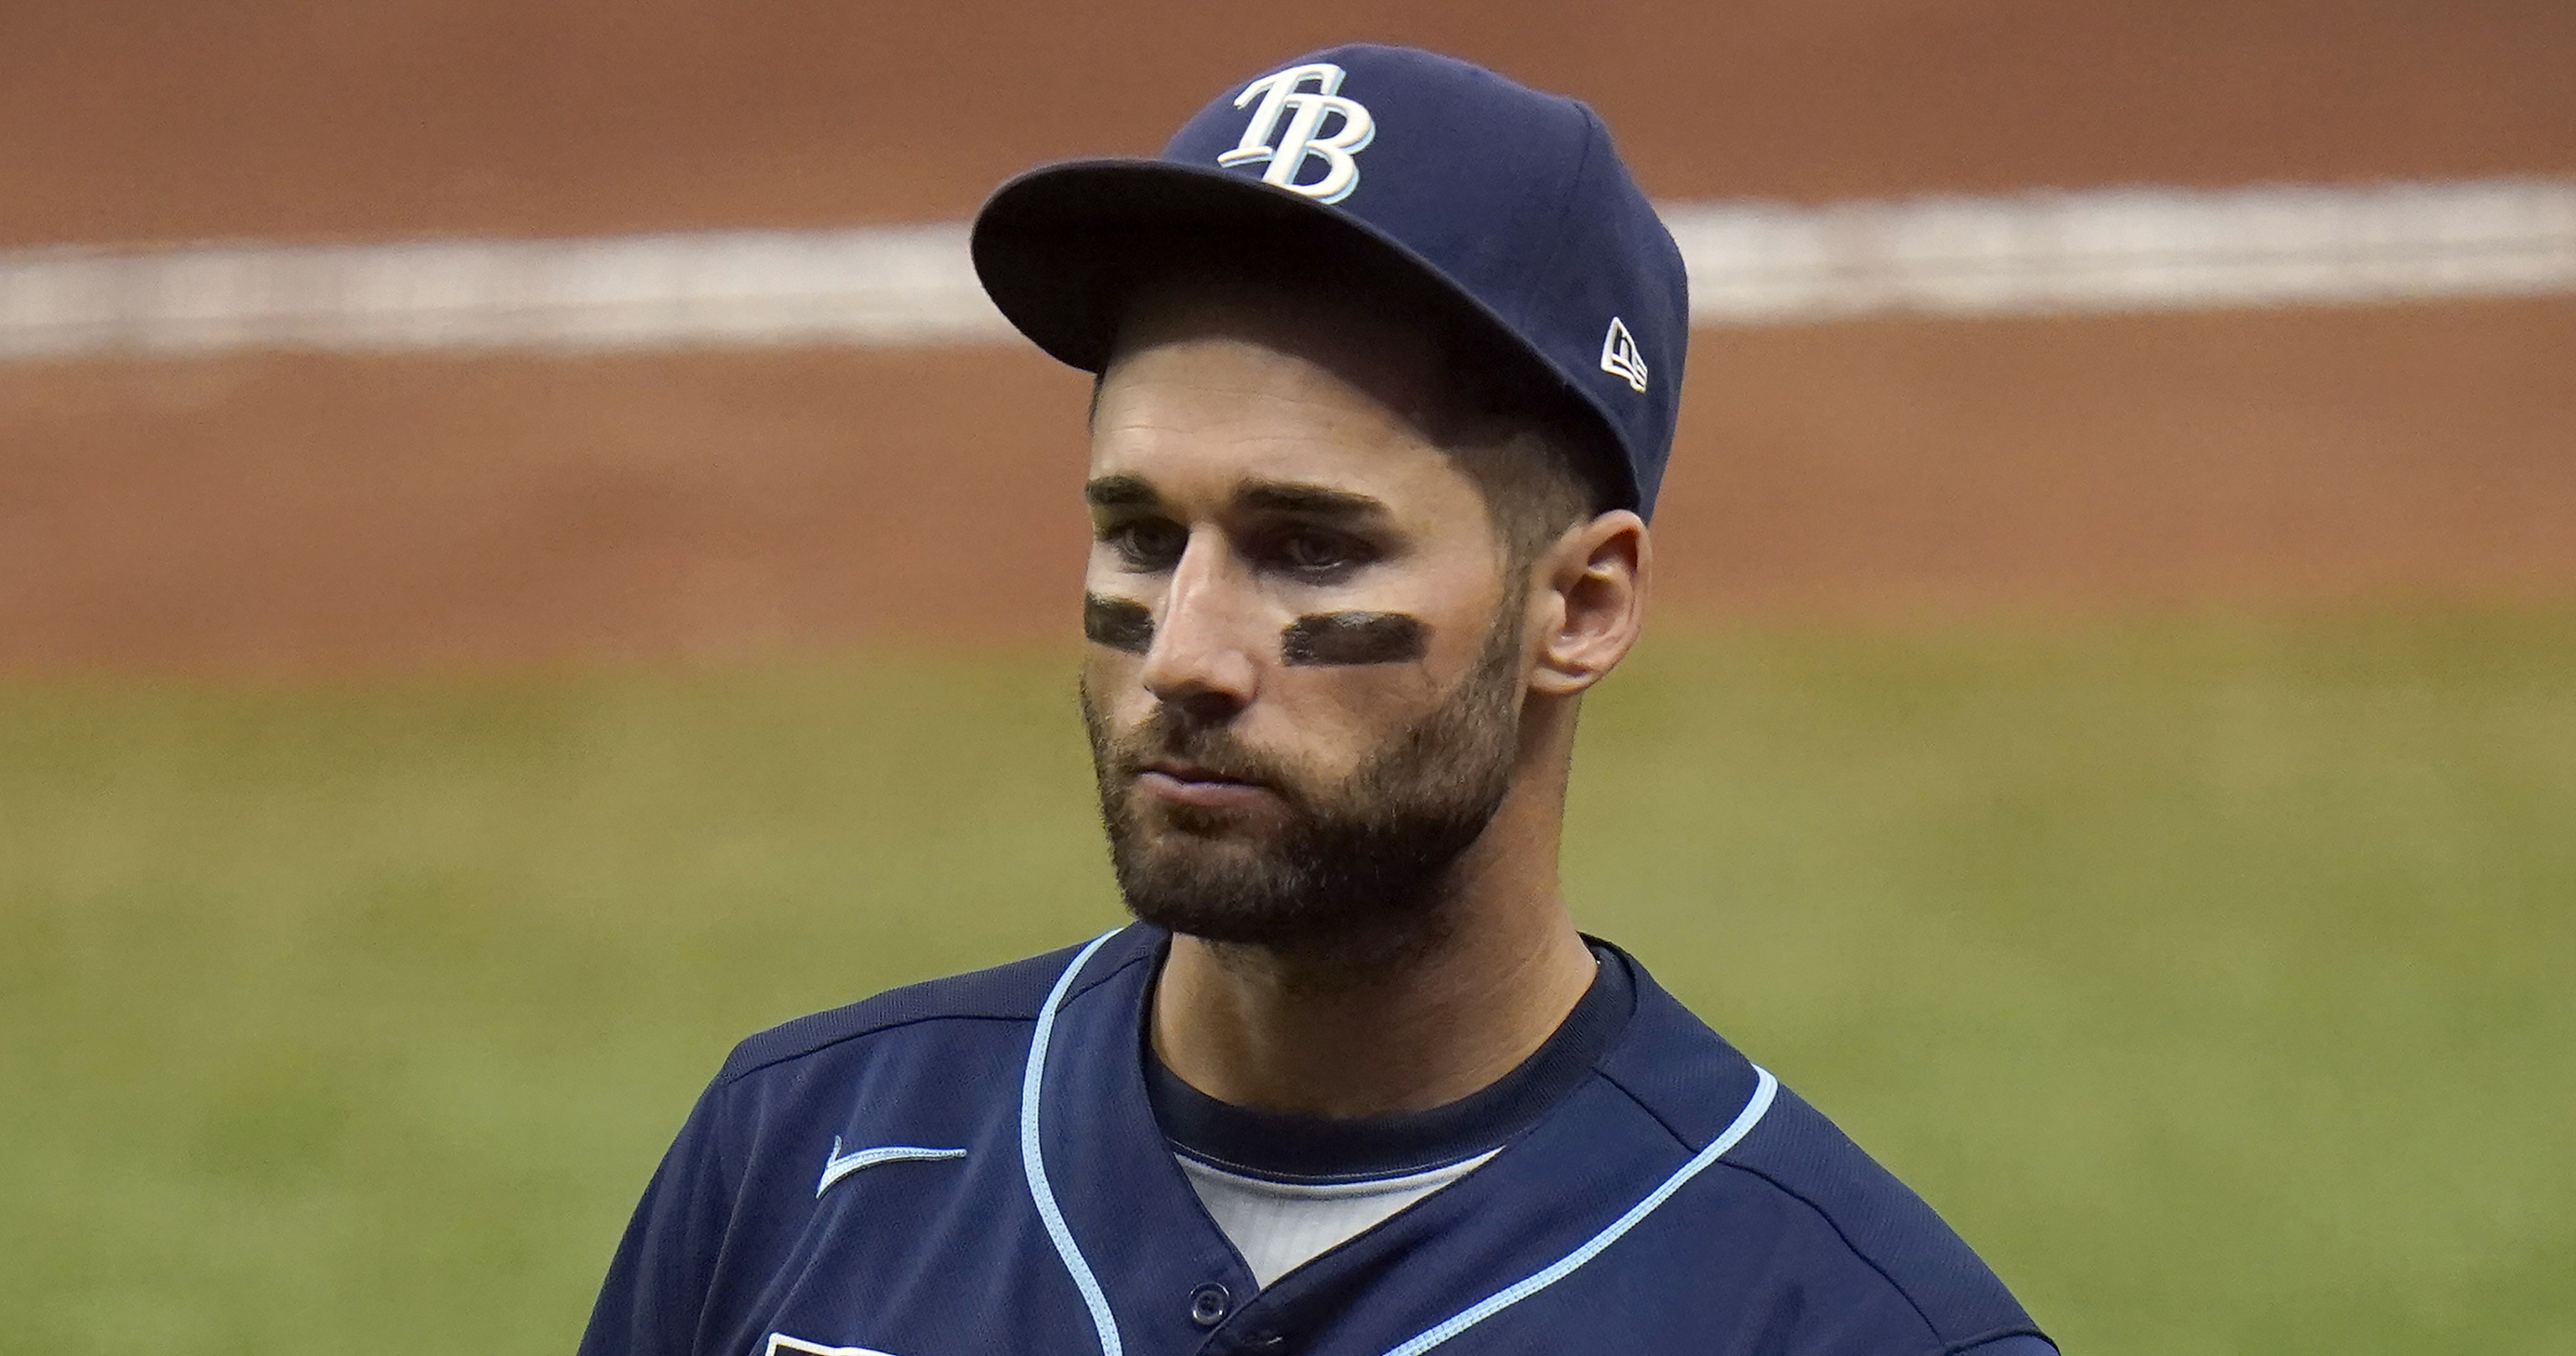 Kevin Kiermaier, Rays outfielder, nears the end of long-term contract